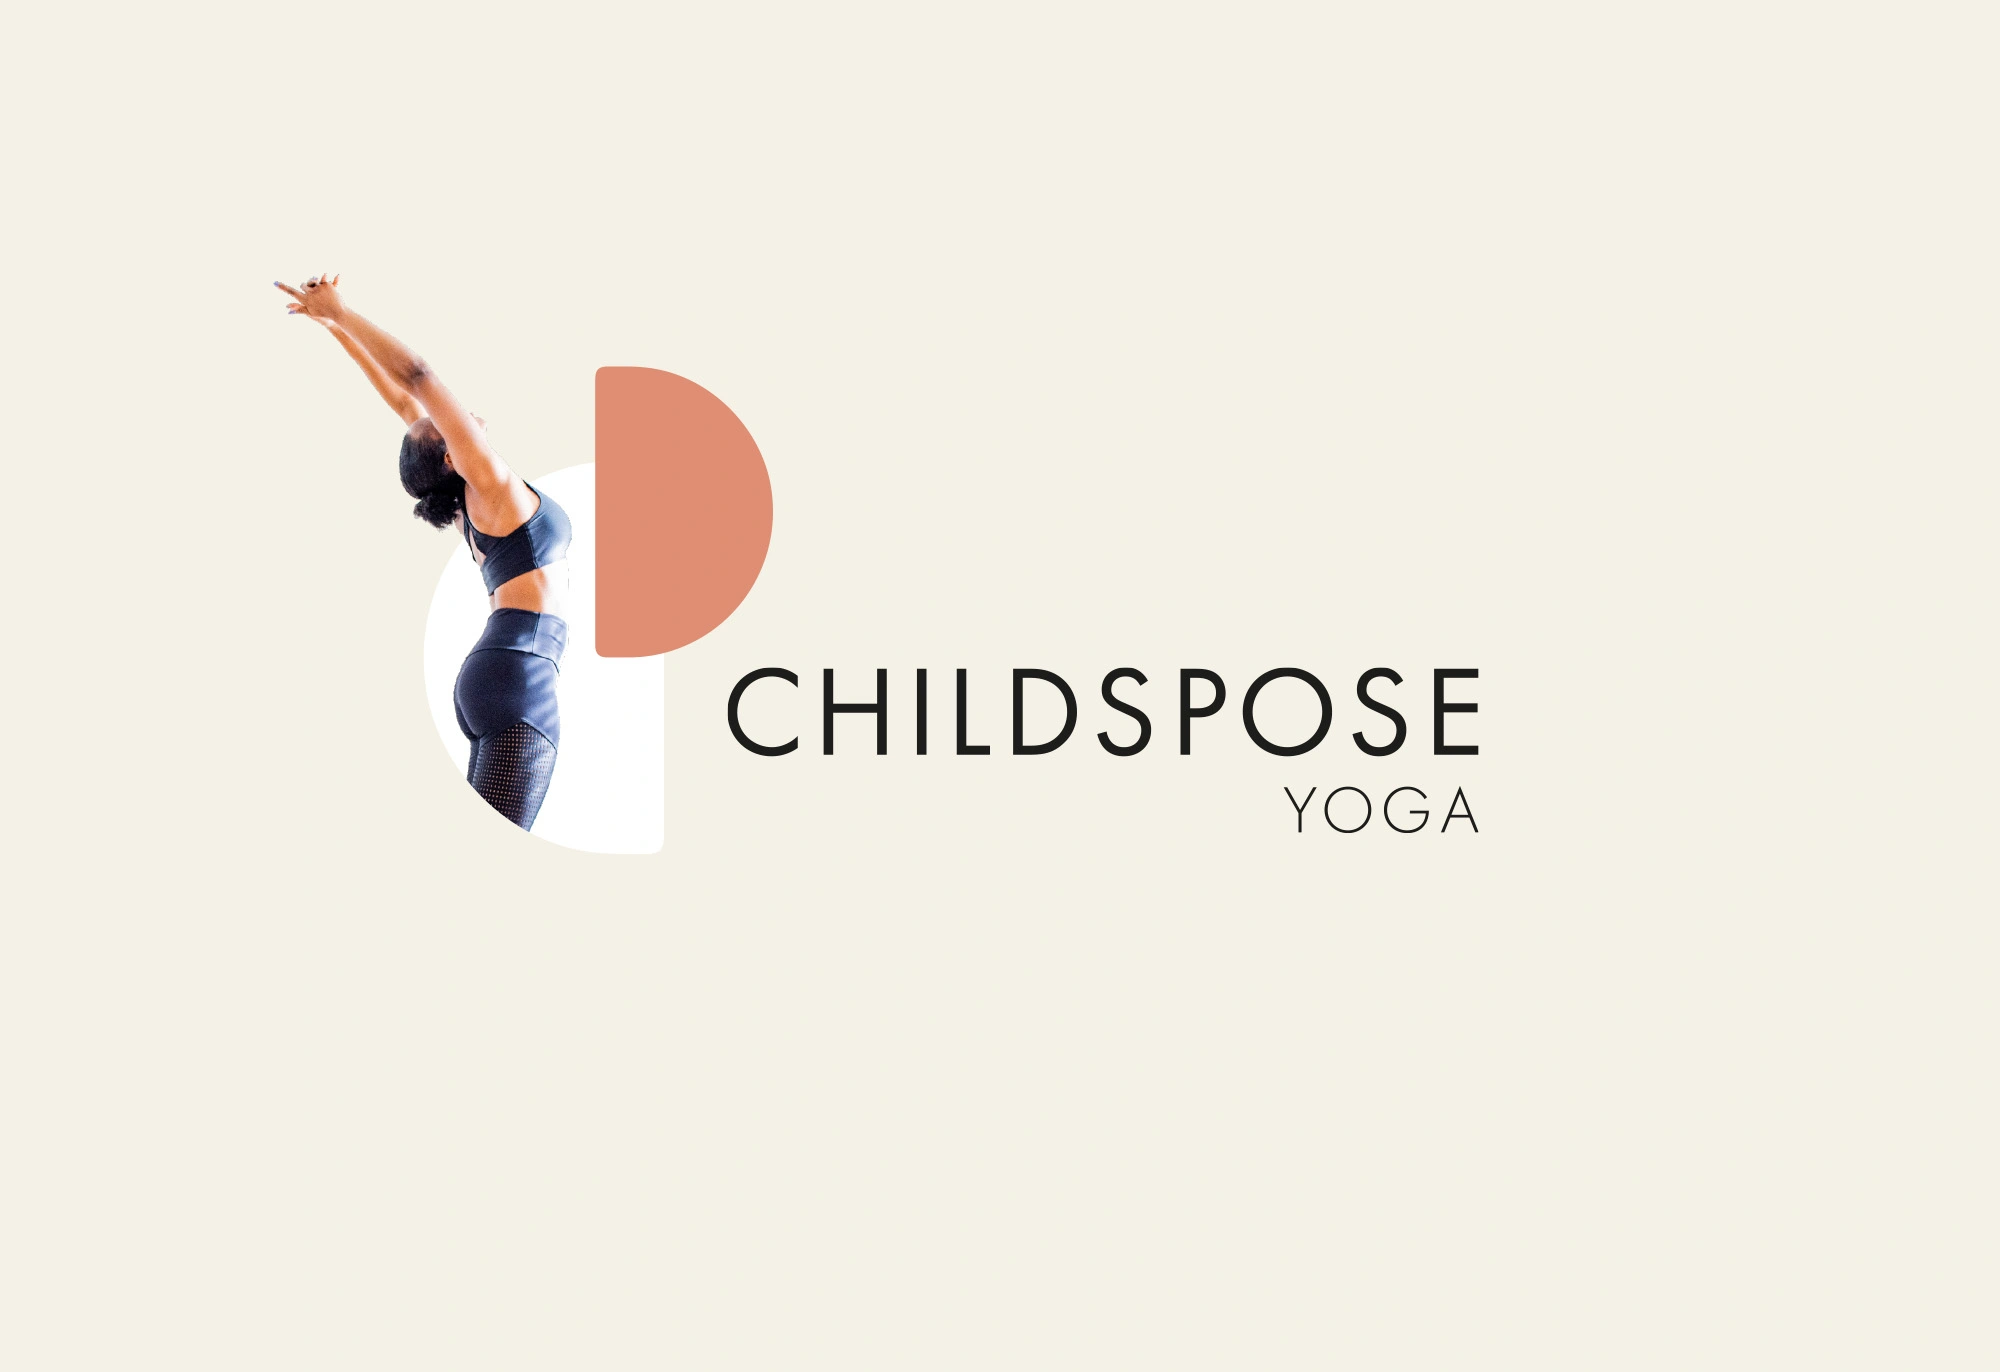 the playful Childs Pose Yoga logo in cream, pink and black, the small image shows a woman doing a yoga stretch